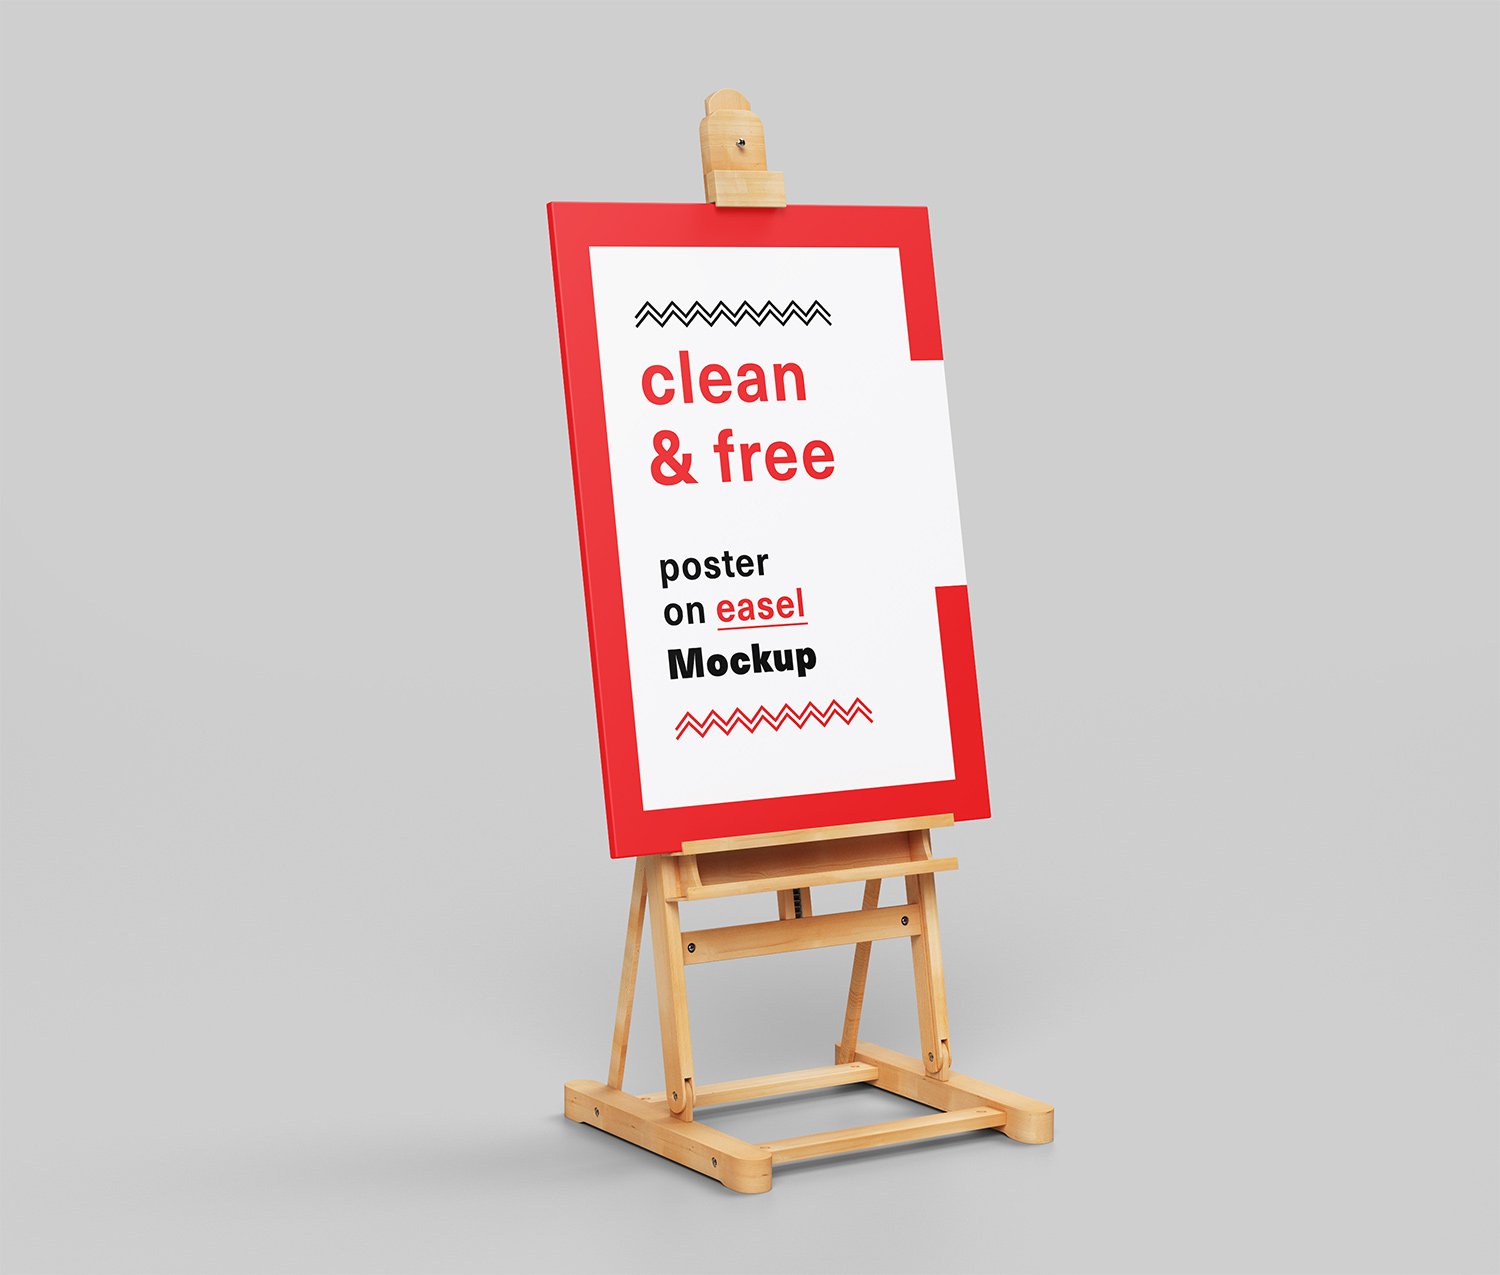 Canvas-Poster-on-Easel-Mockup-Free-01